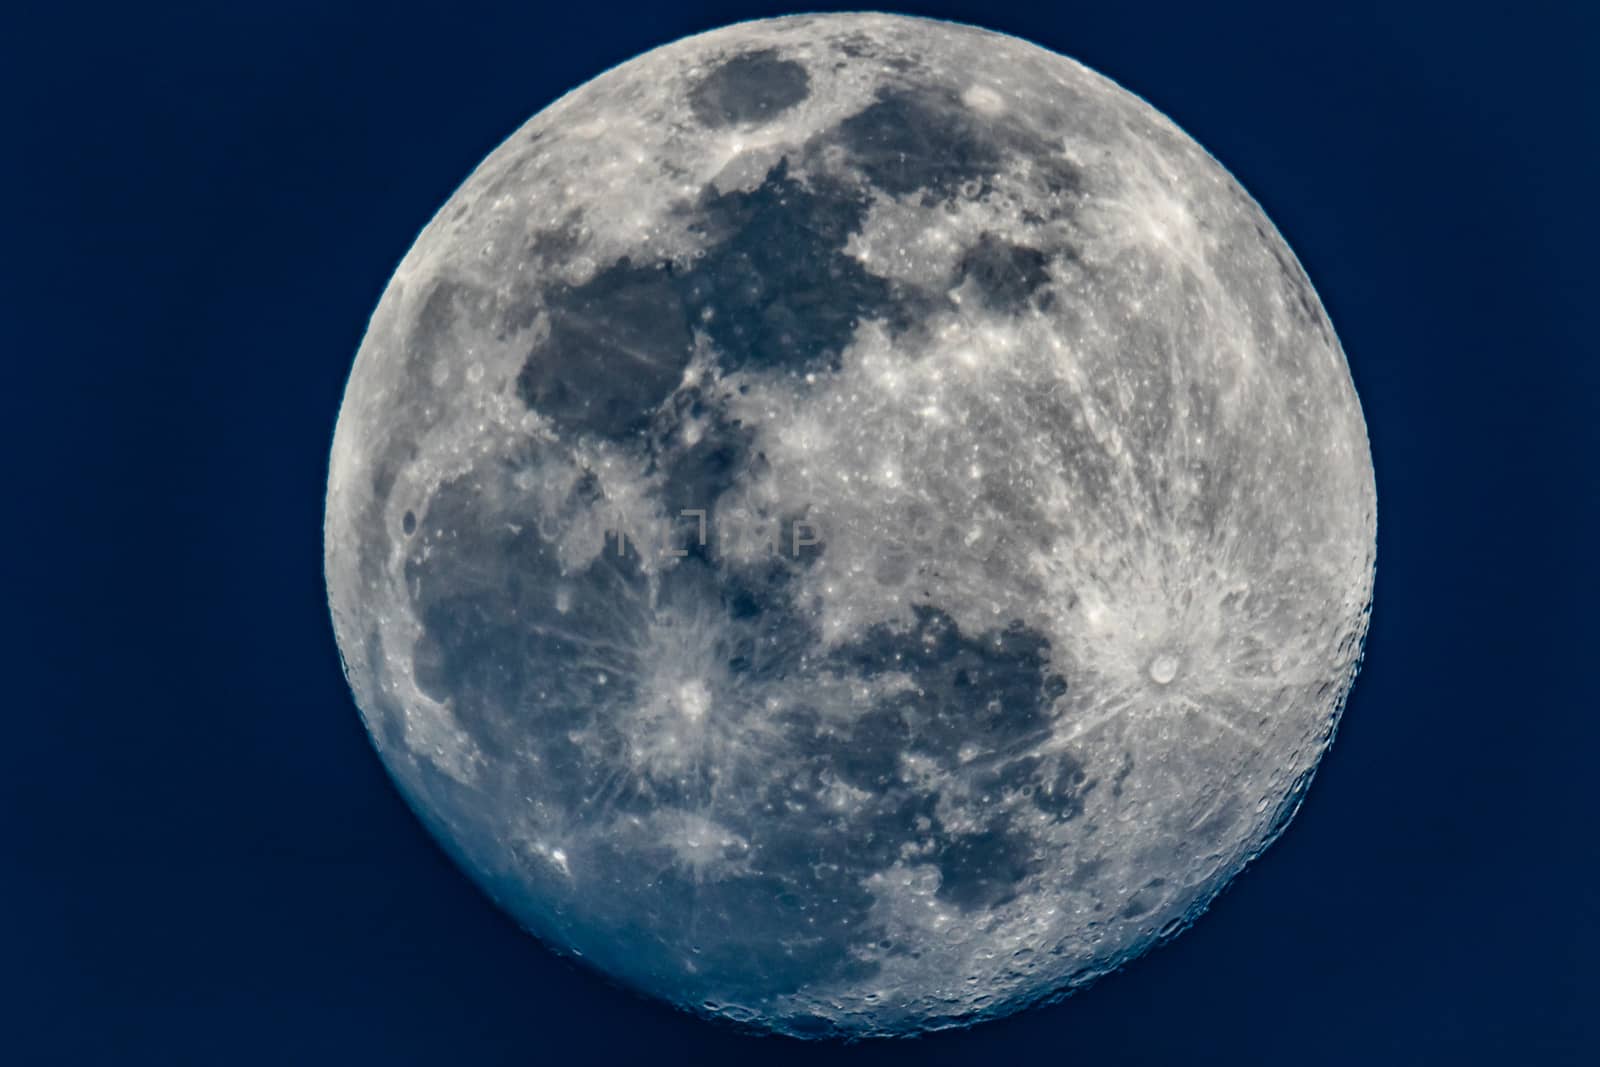 Moon closeup showing the details of the lunar surface. March 19, 2019